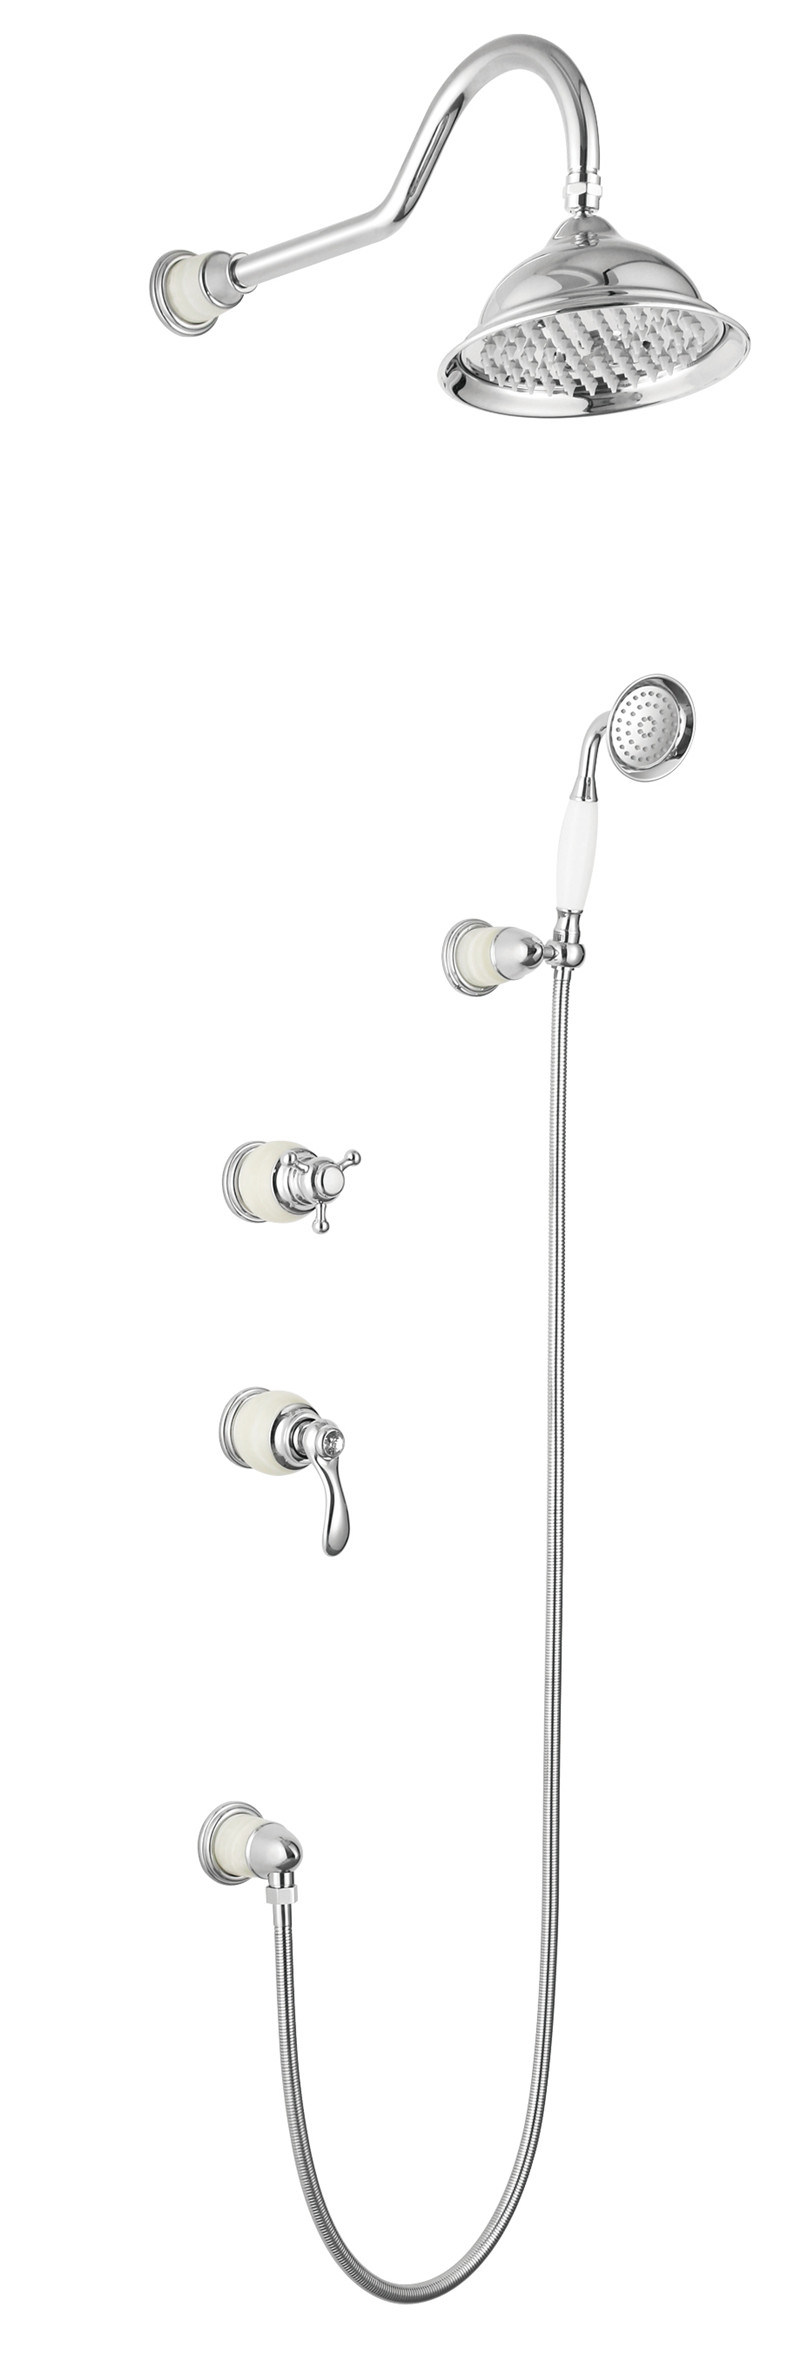 Wall Mounted Antique Brass Concealed Shower Set (zf-W58)